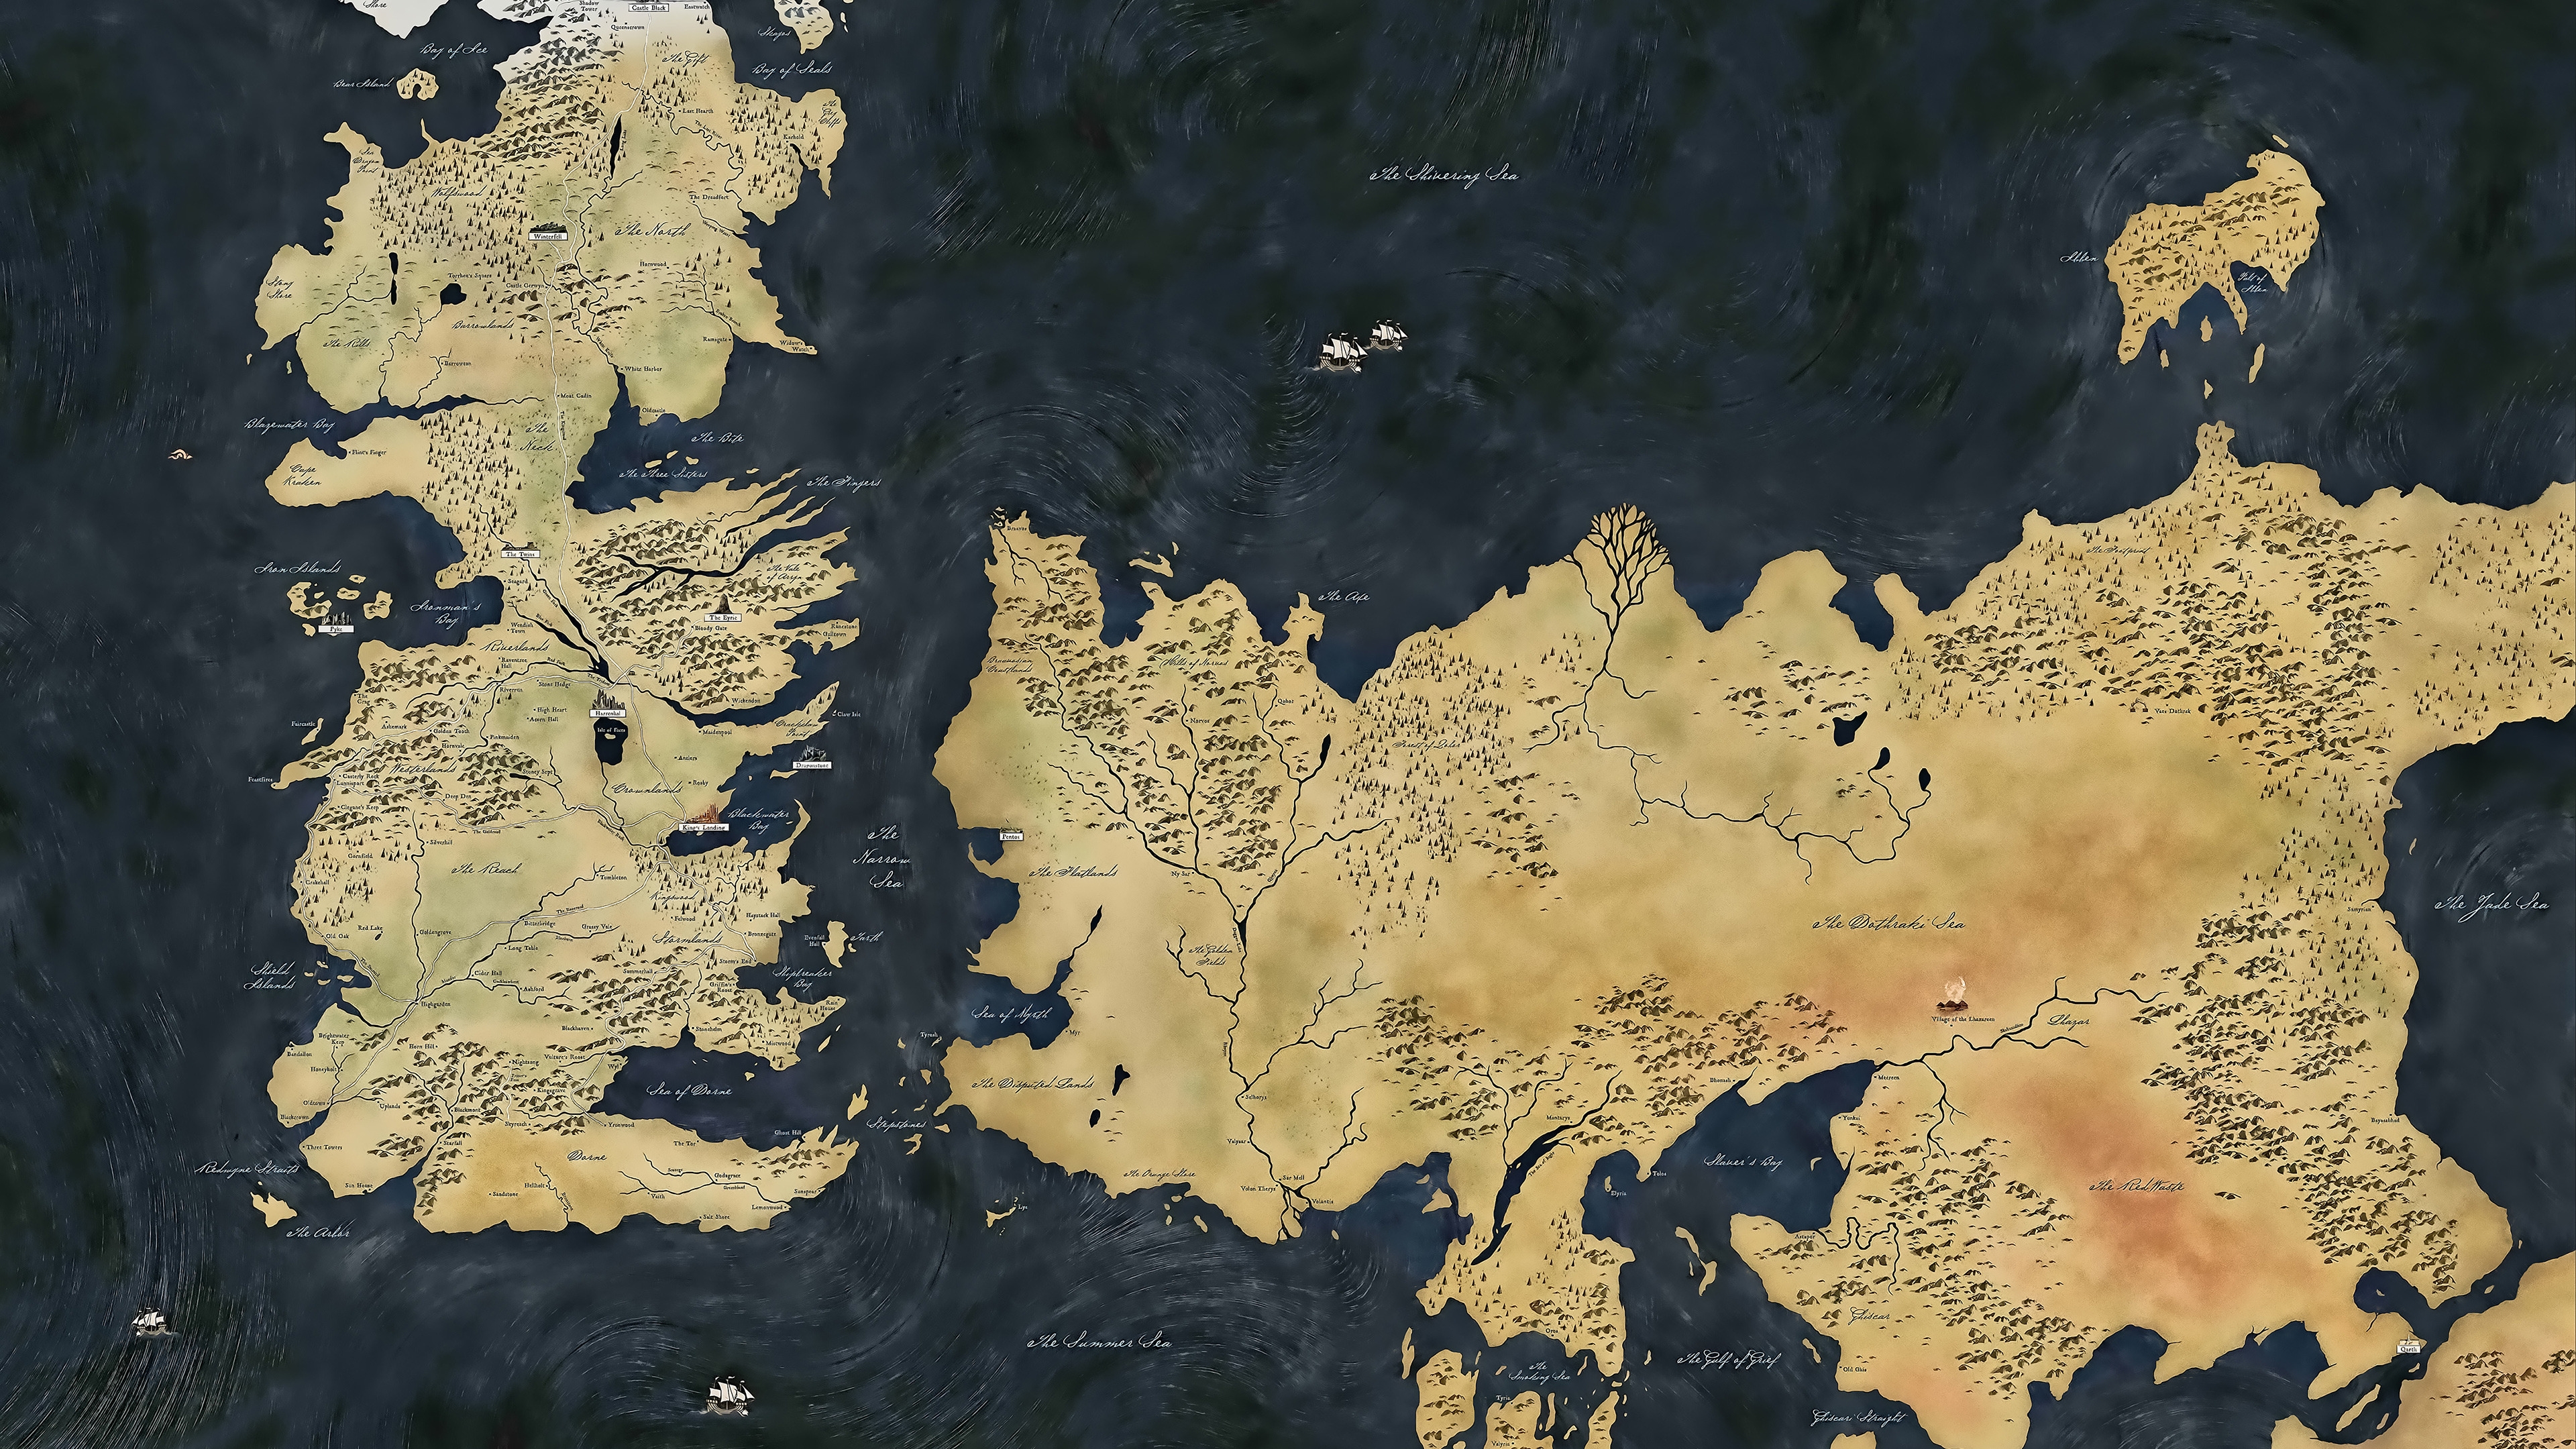 Map Game of Thrones for 3840 x 2160 Ultra HD resolution